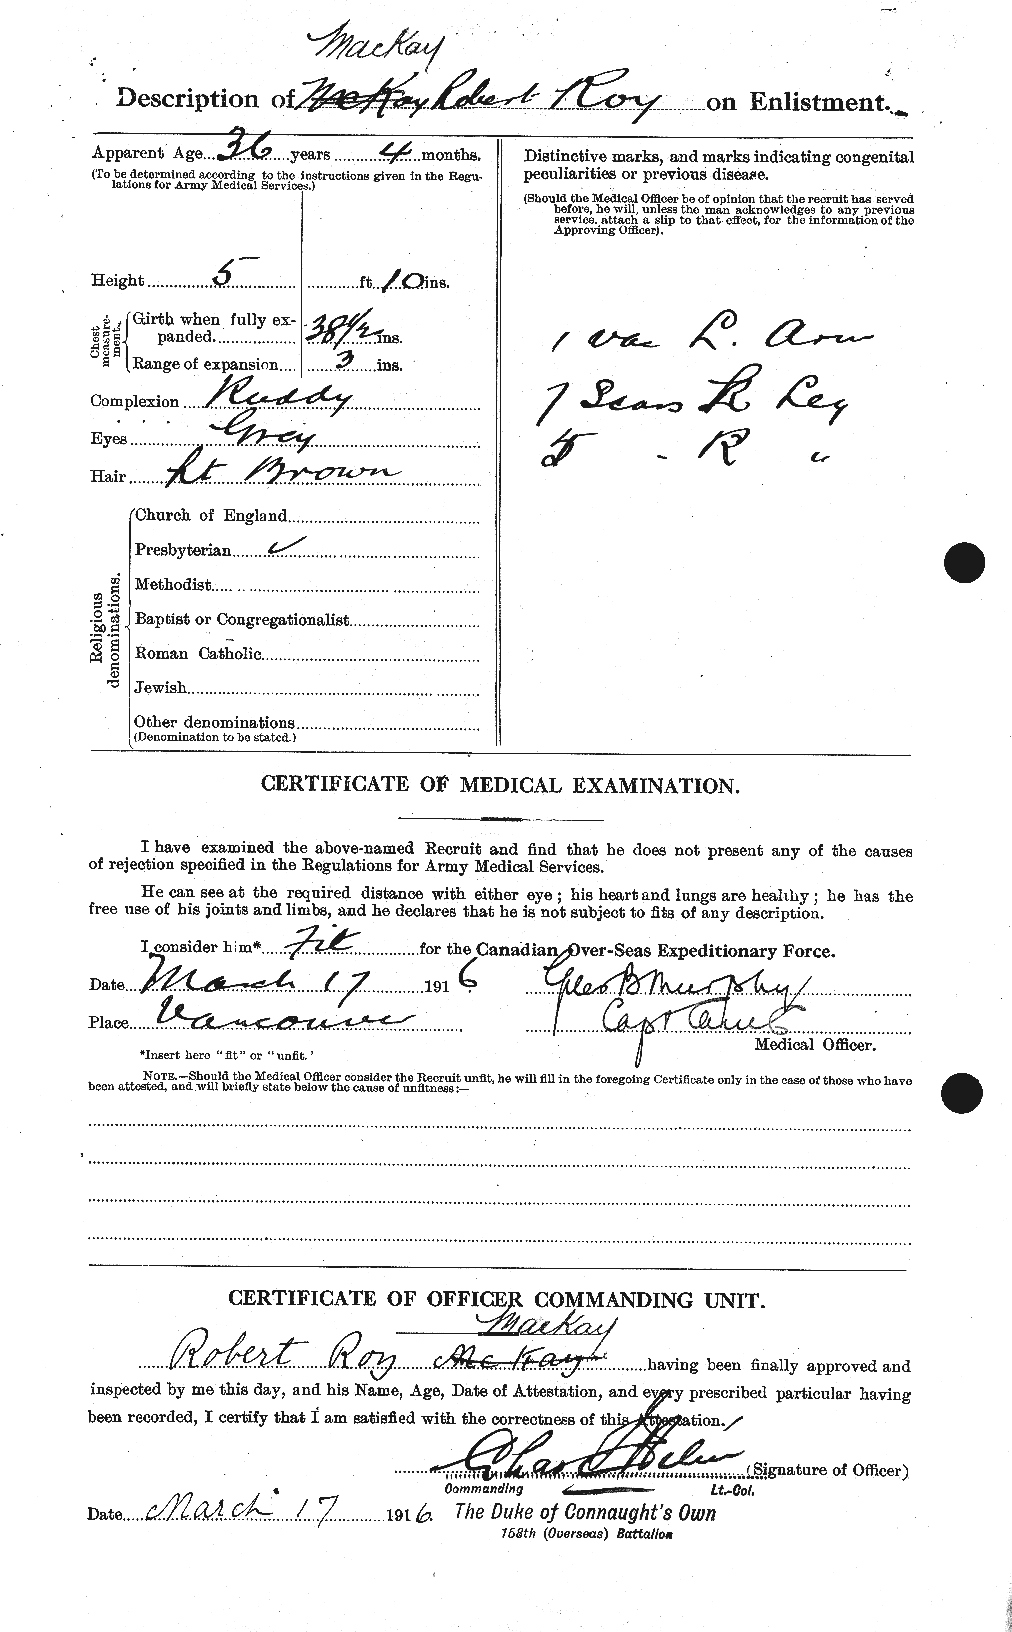 Personnel Records of the First World War - CEF 530108b